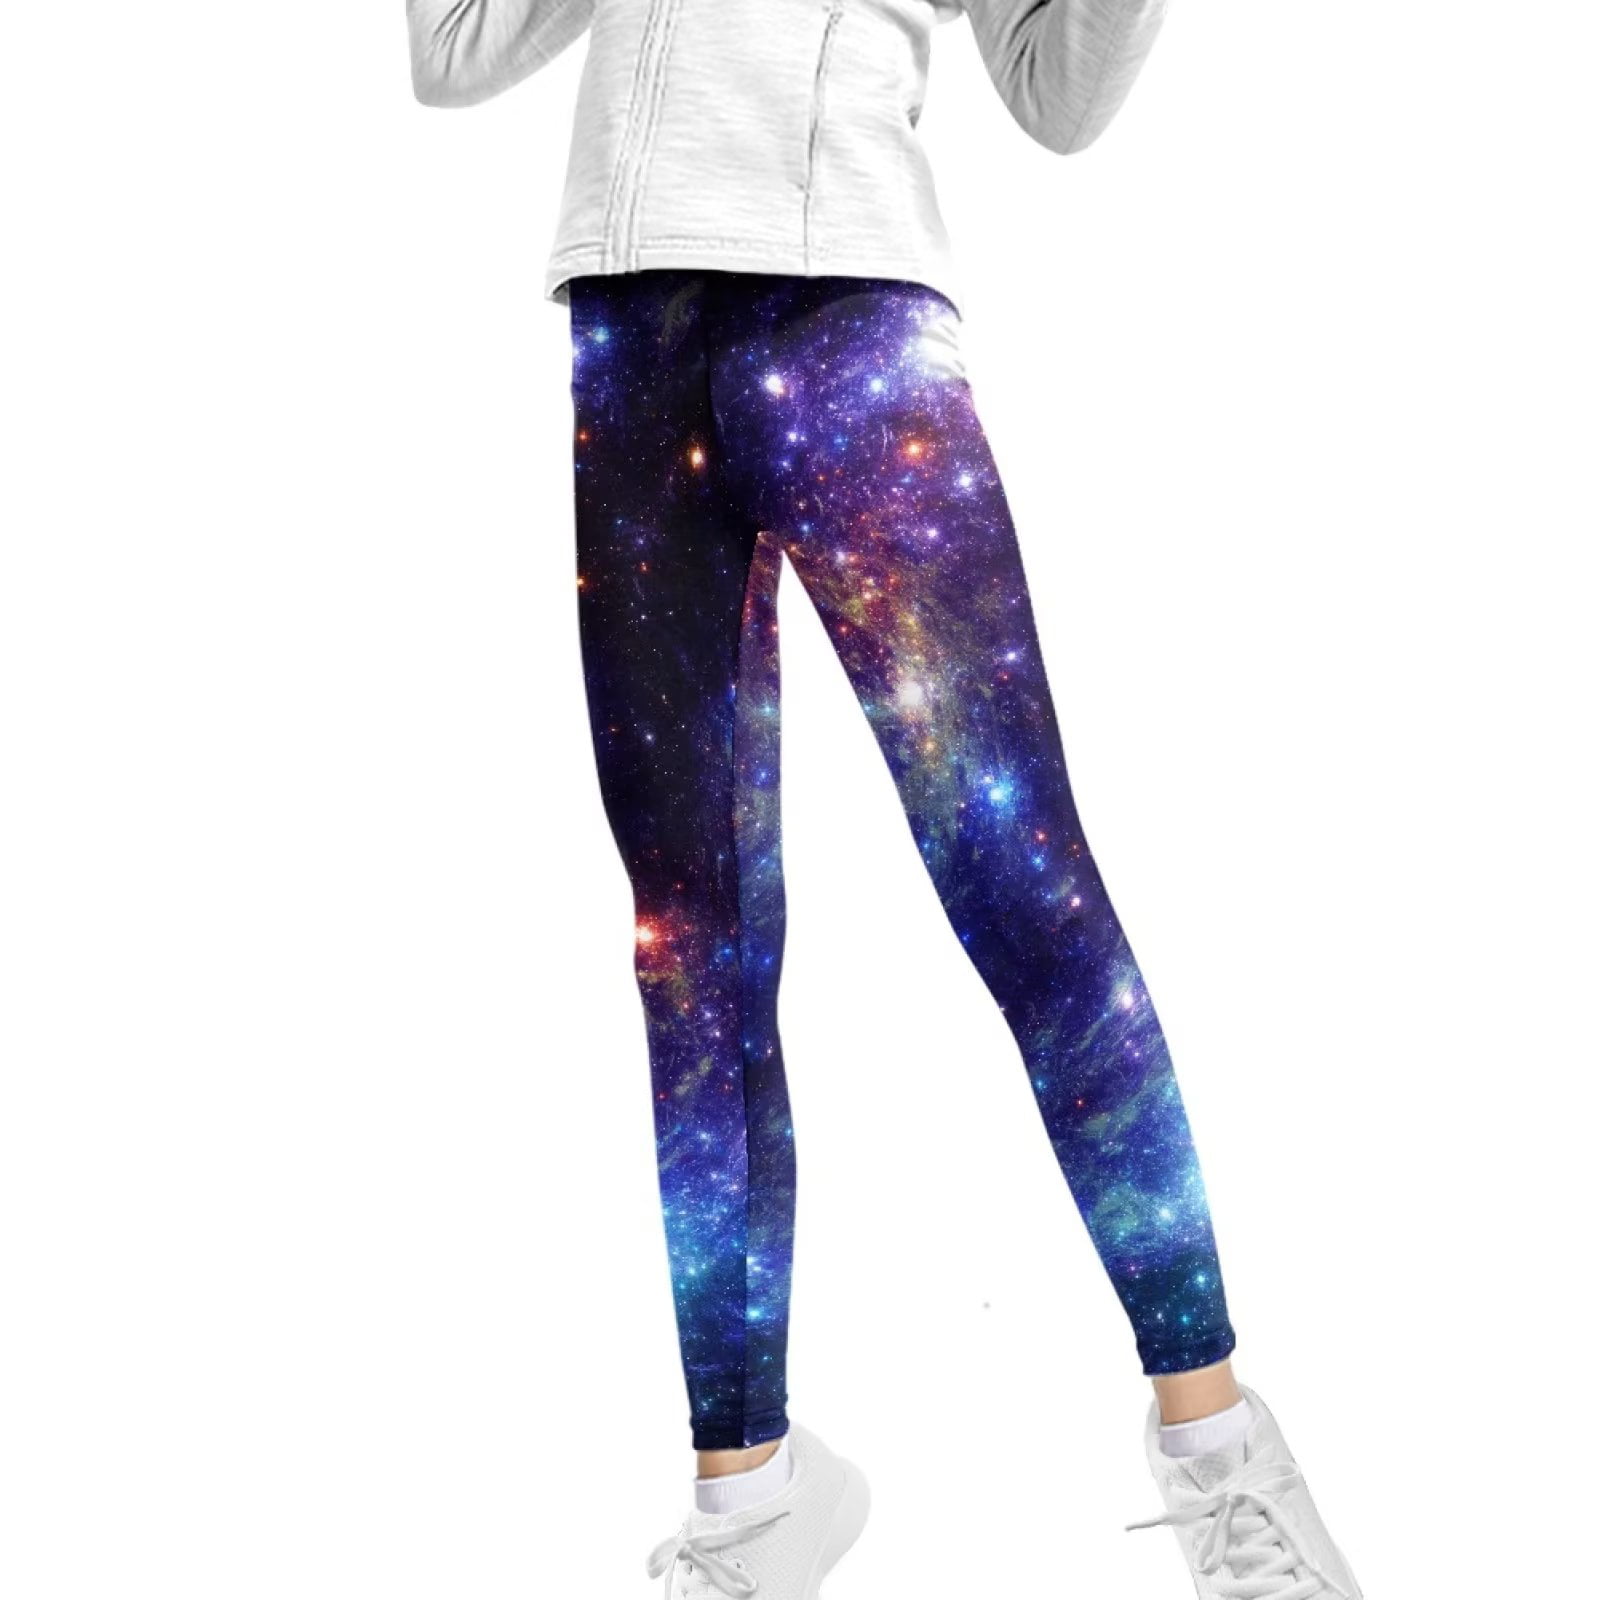 FKELYI Space Star Print Cool Kids Leggings Size 6-7 Years Stretchy Running  Tights Teen Girls Durable Travel Yoga Pants High Waisted Butt Lift